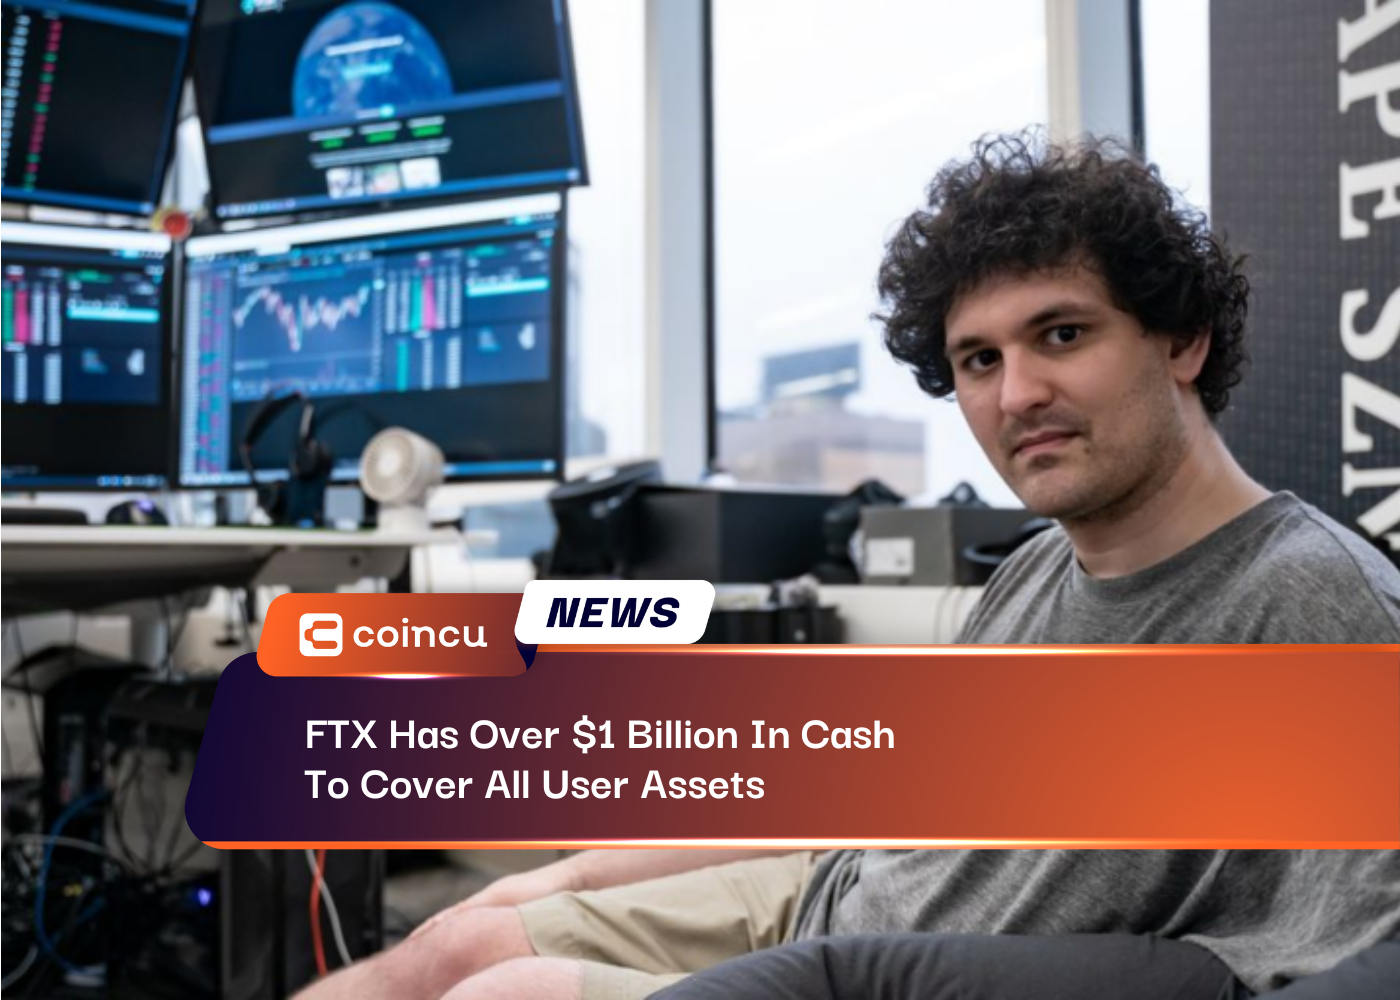 FTX Has Over $1 Billion In Cash To Cover All User Assets